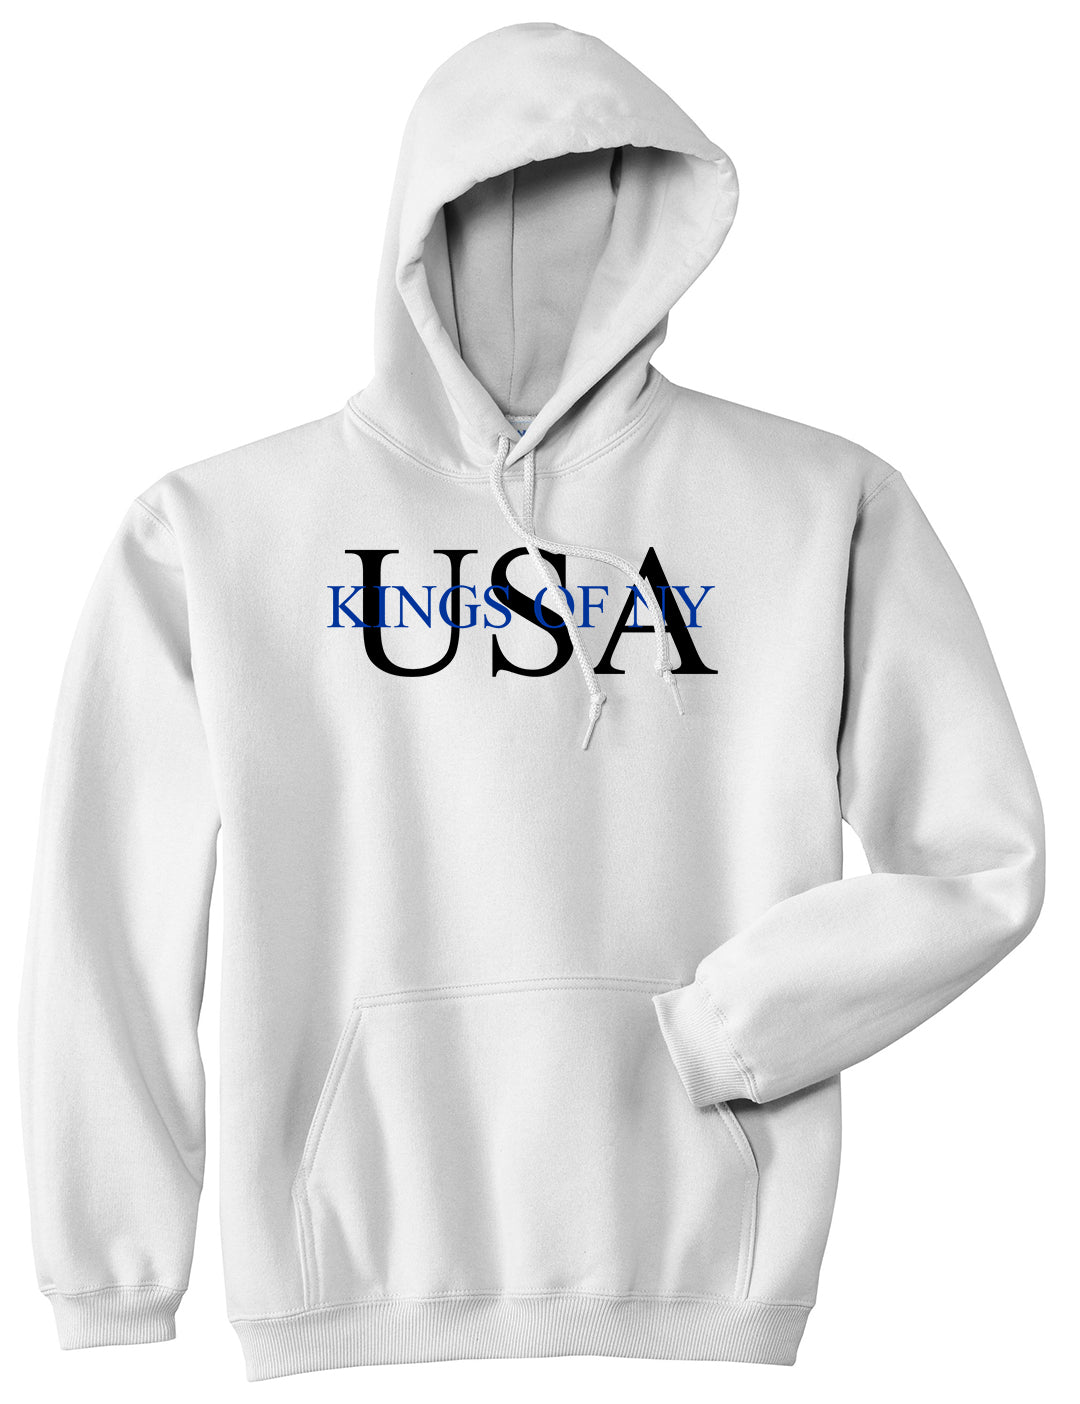 USA Kony Logo Pullover Hoodie in White